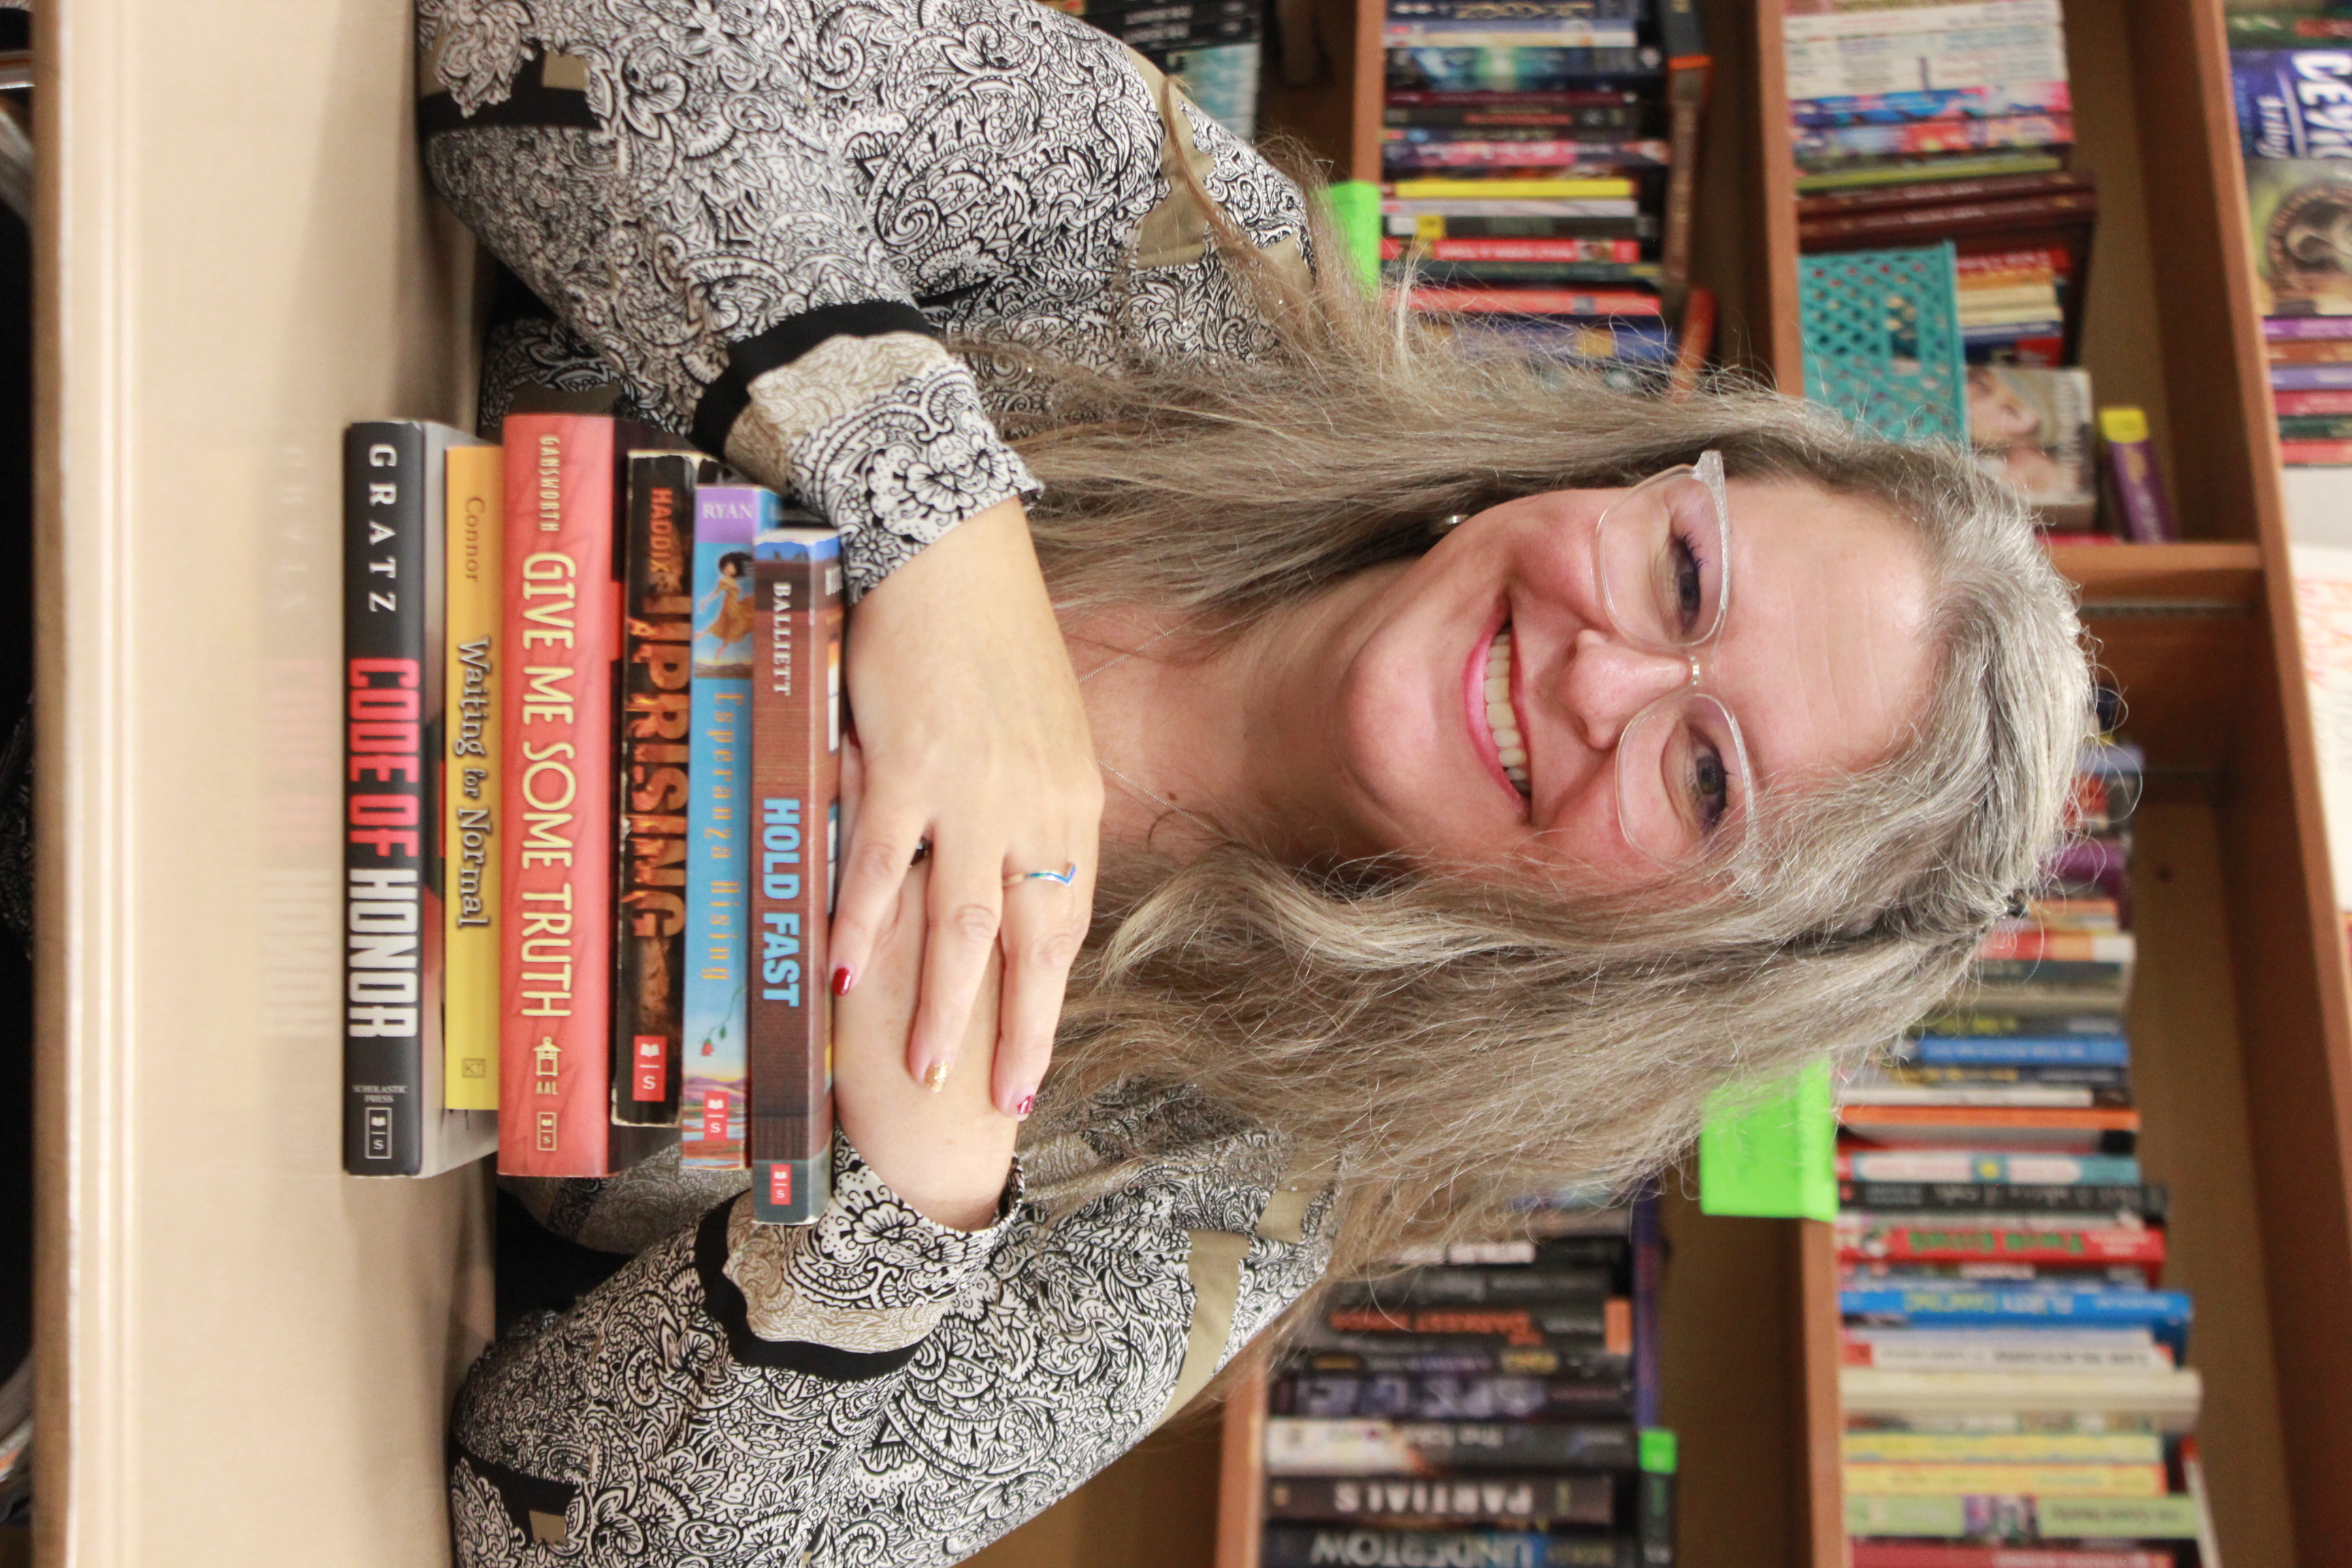 Debbie Carew smiles while resting her hands on a stack of books